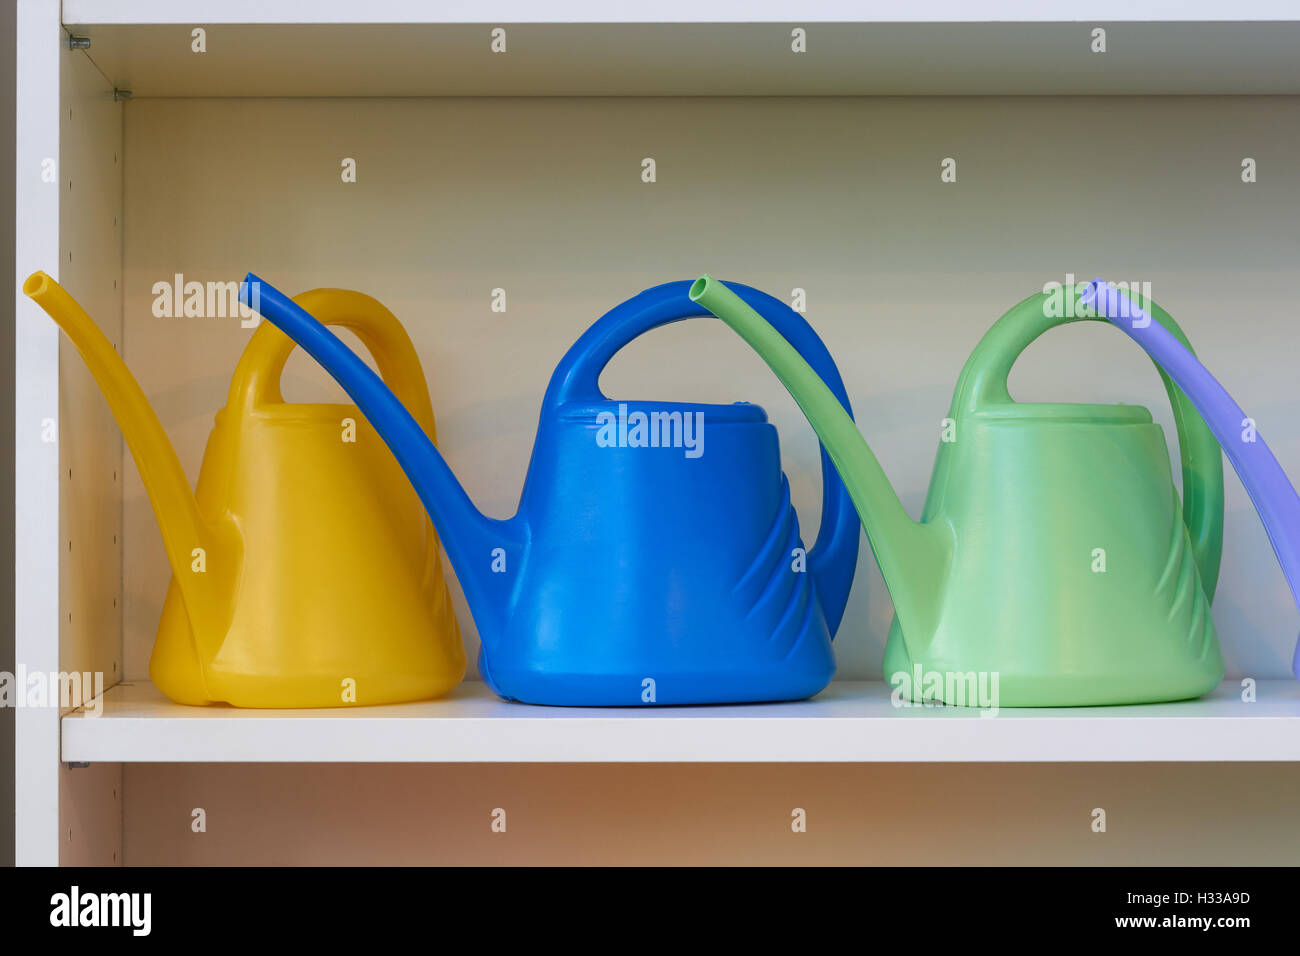 Three watering cans for watering flowers on the shelf Stock Photo